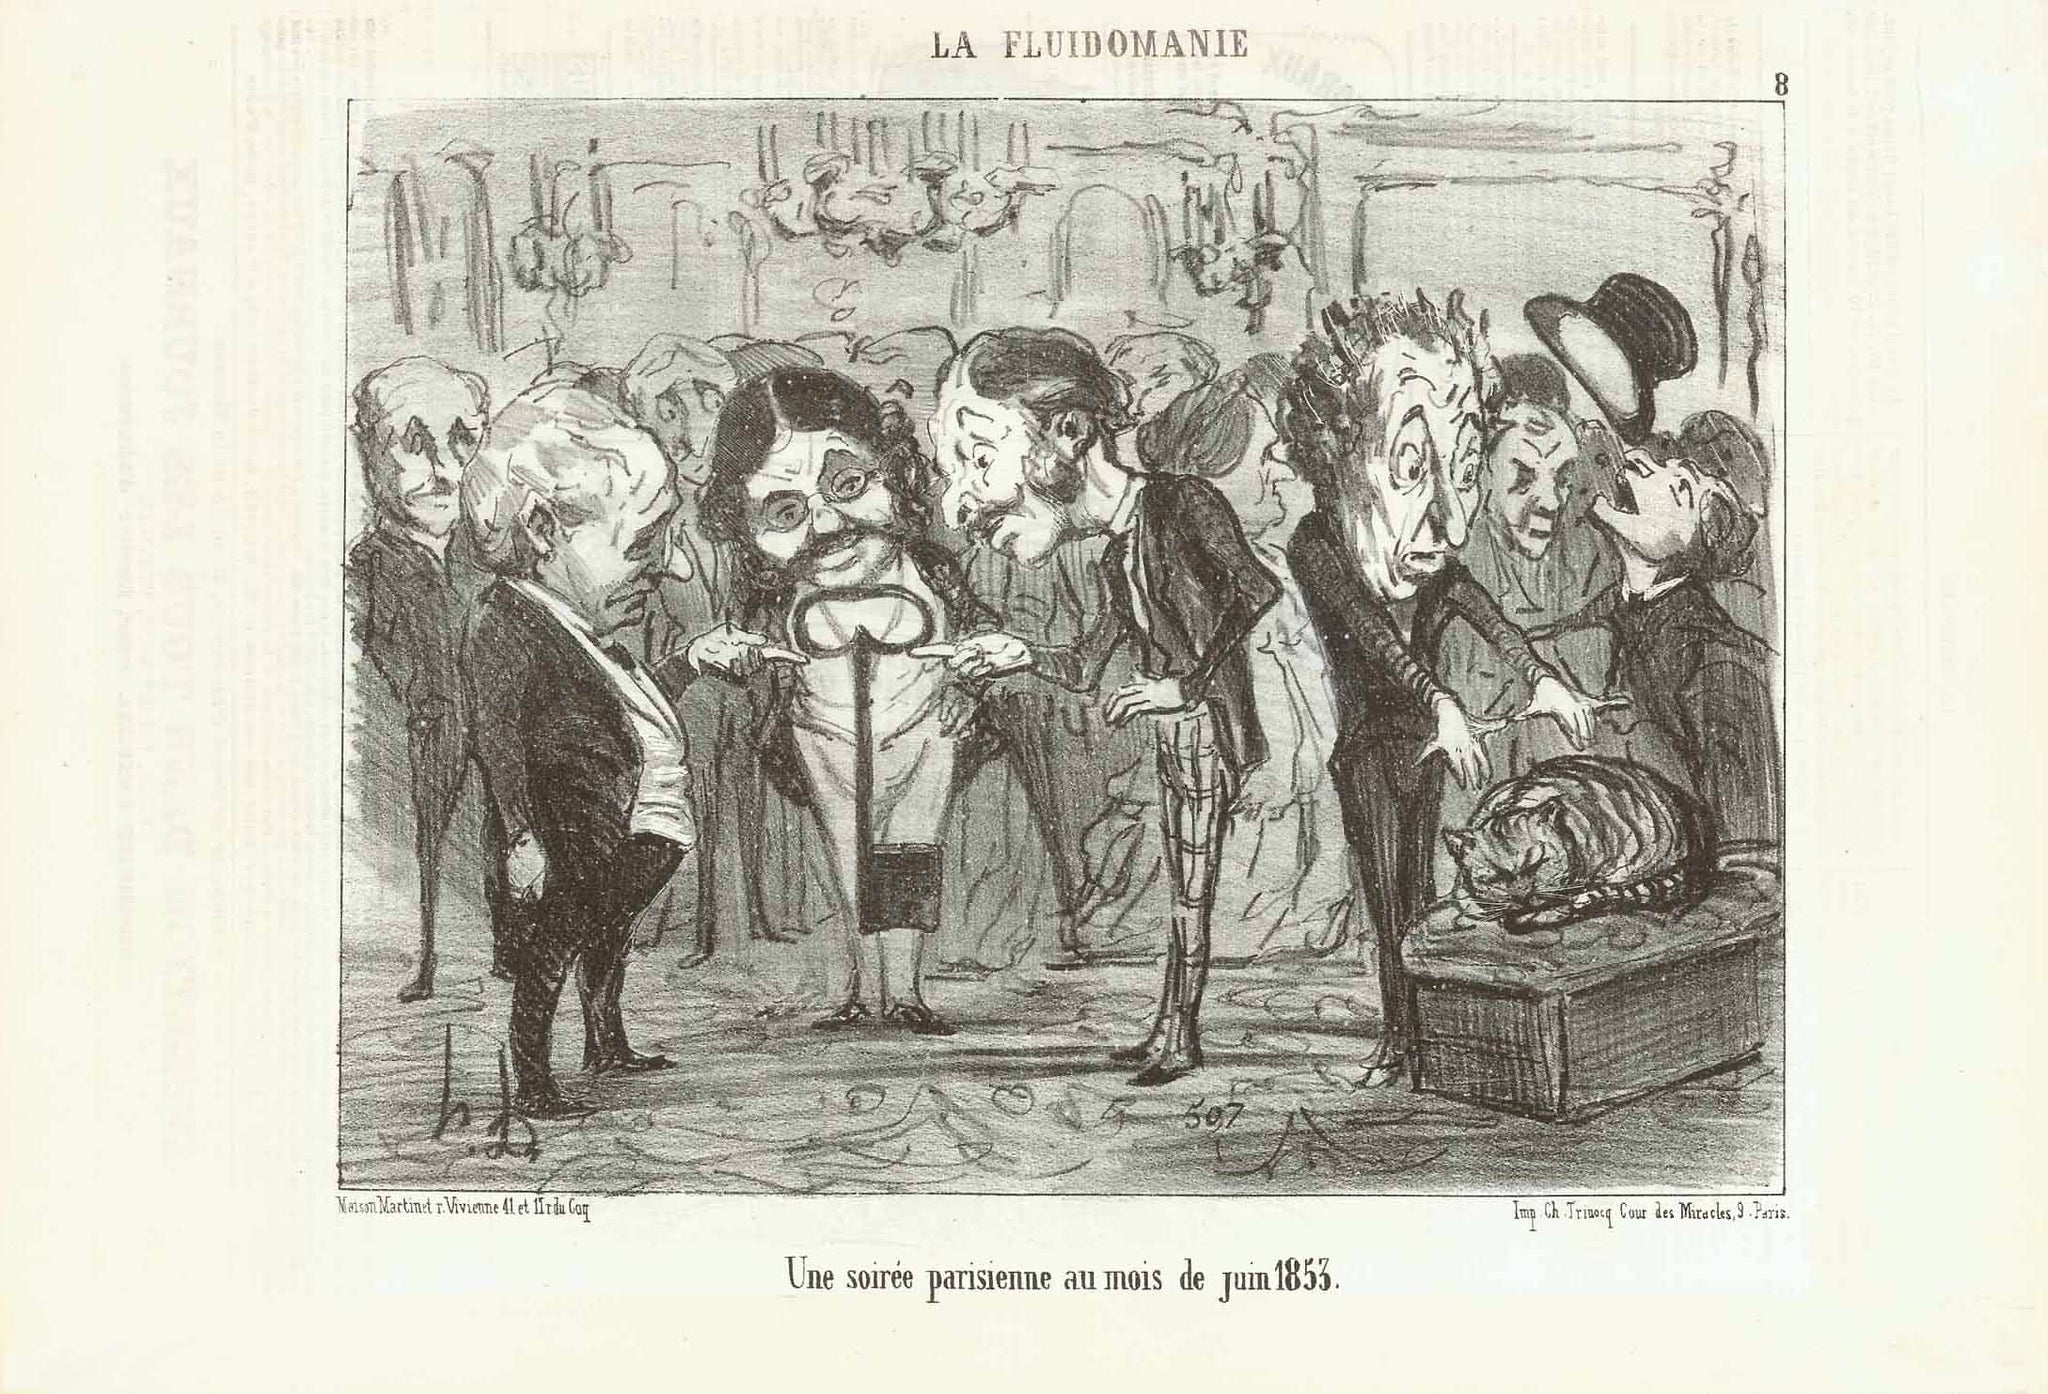 "Une soiree parisienne au mois de juin 1853"  Translation: A Parisian dinner party (seance) in the month of June 1853  Lithograph by Honore Daumier (1808-1879)  Daumier index nr. LD 2404  Series: "La Fluidomanie" Nr. 8  Published in: Le Charivari  Paris, June 7, 1853  Original antique print    Fashionable occult party in Paris in mid 19th century. Magic makes a heavy iron key lift off the ground.  Another guest with high expectations is vainly trying to lift a sleeping cat.